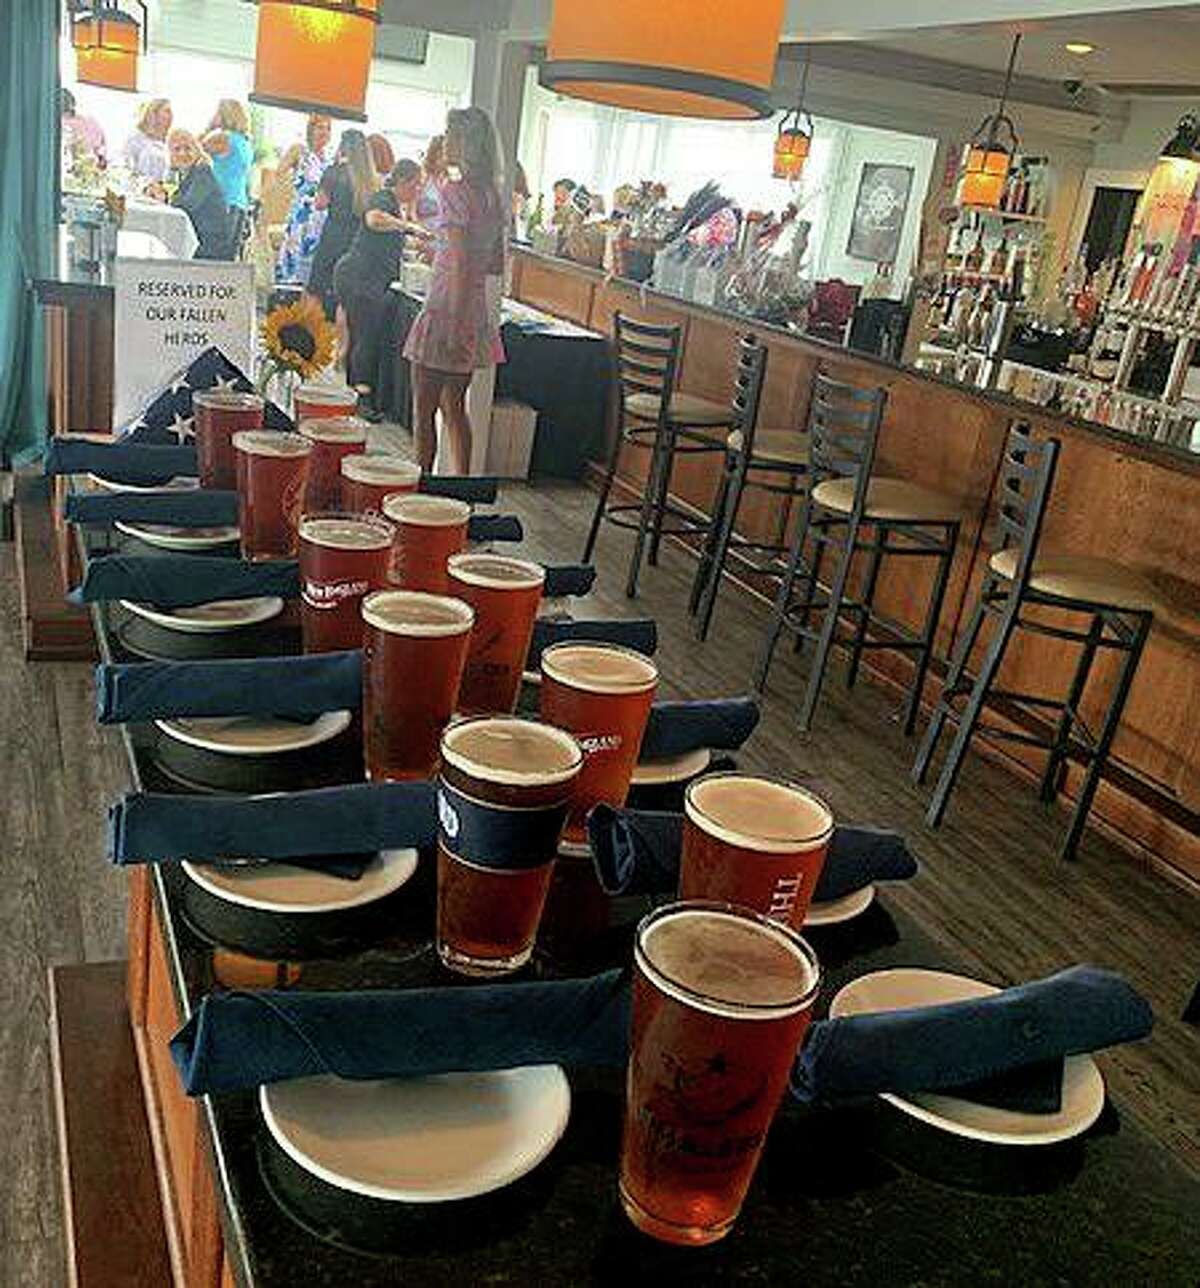 Amid the table settings at Guilford Mooring Restaurant, poured pints of Thimble American Ale and an American flag folded for burial, was a sign that read, “Reserved for our Fallen Heroes.”